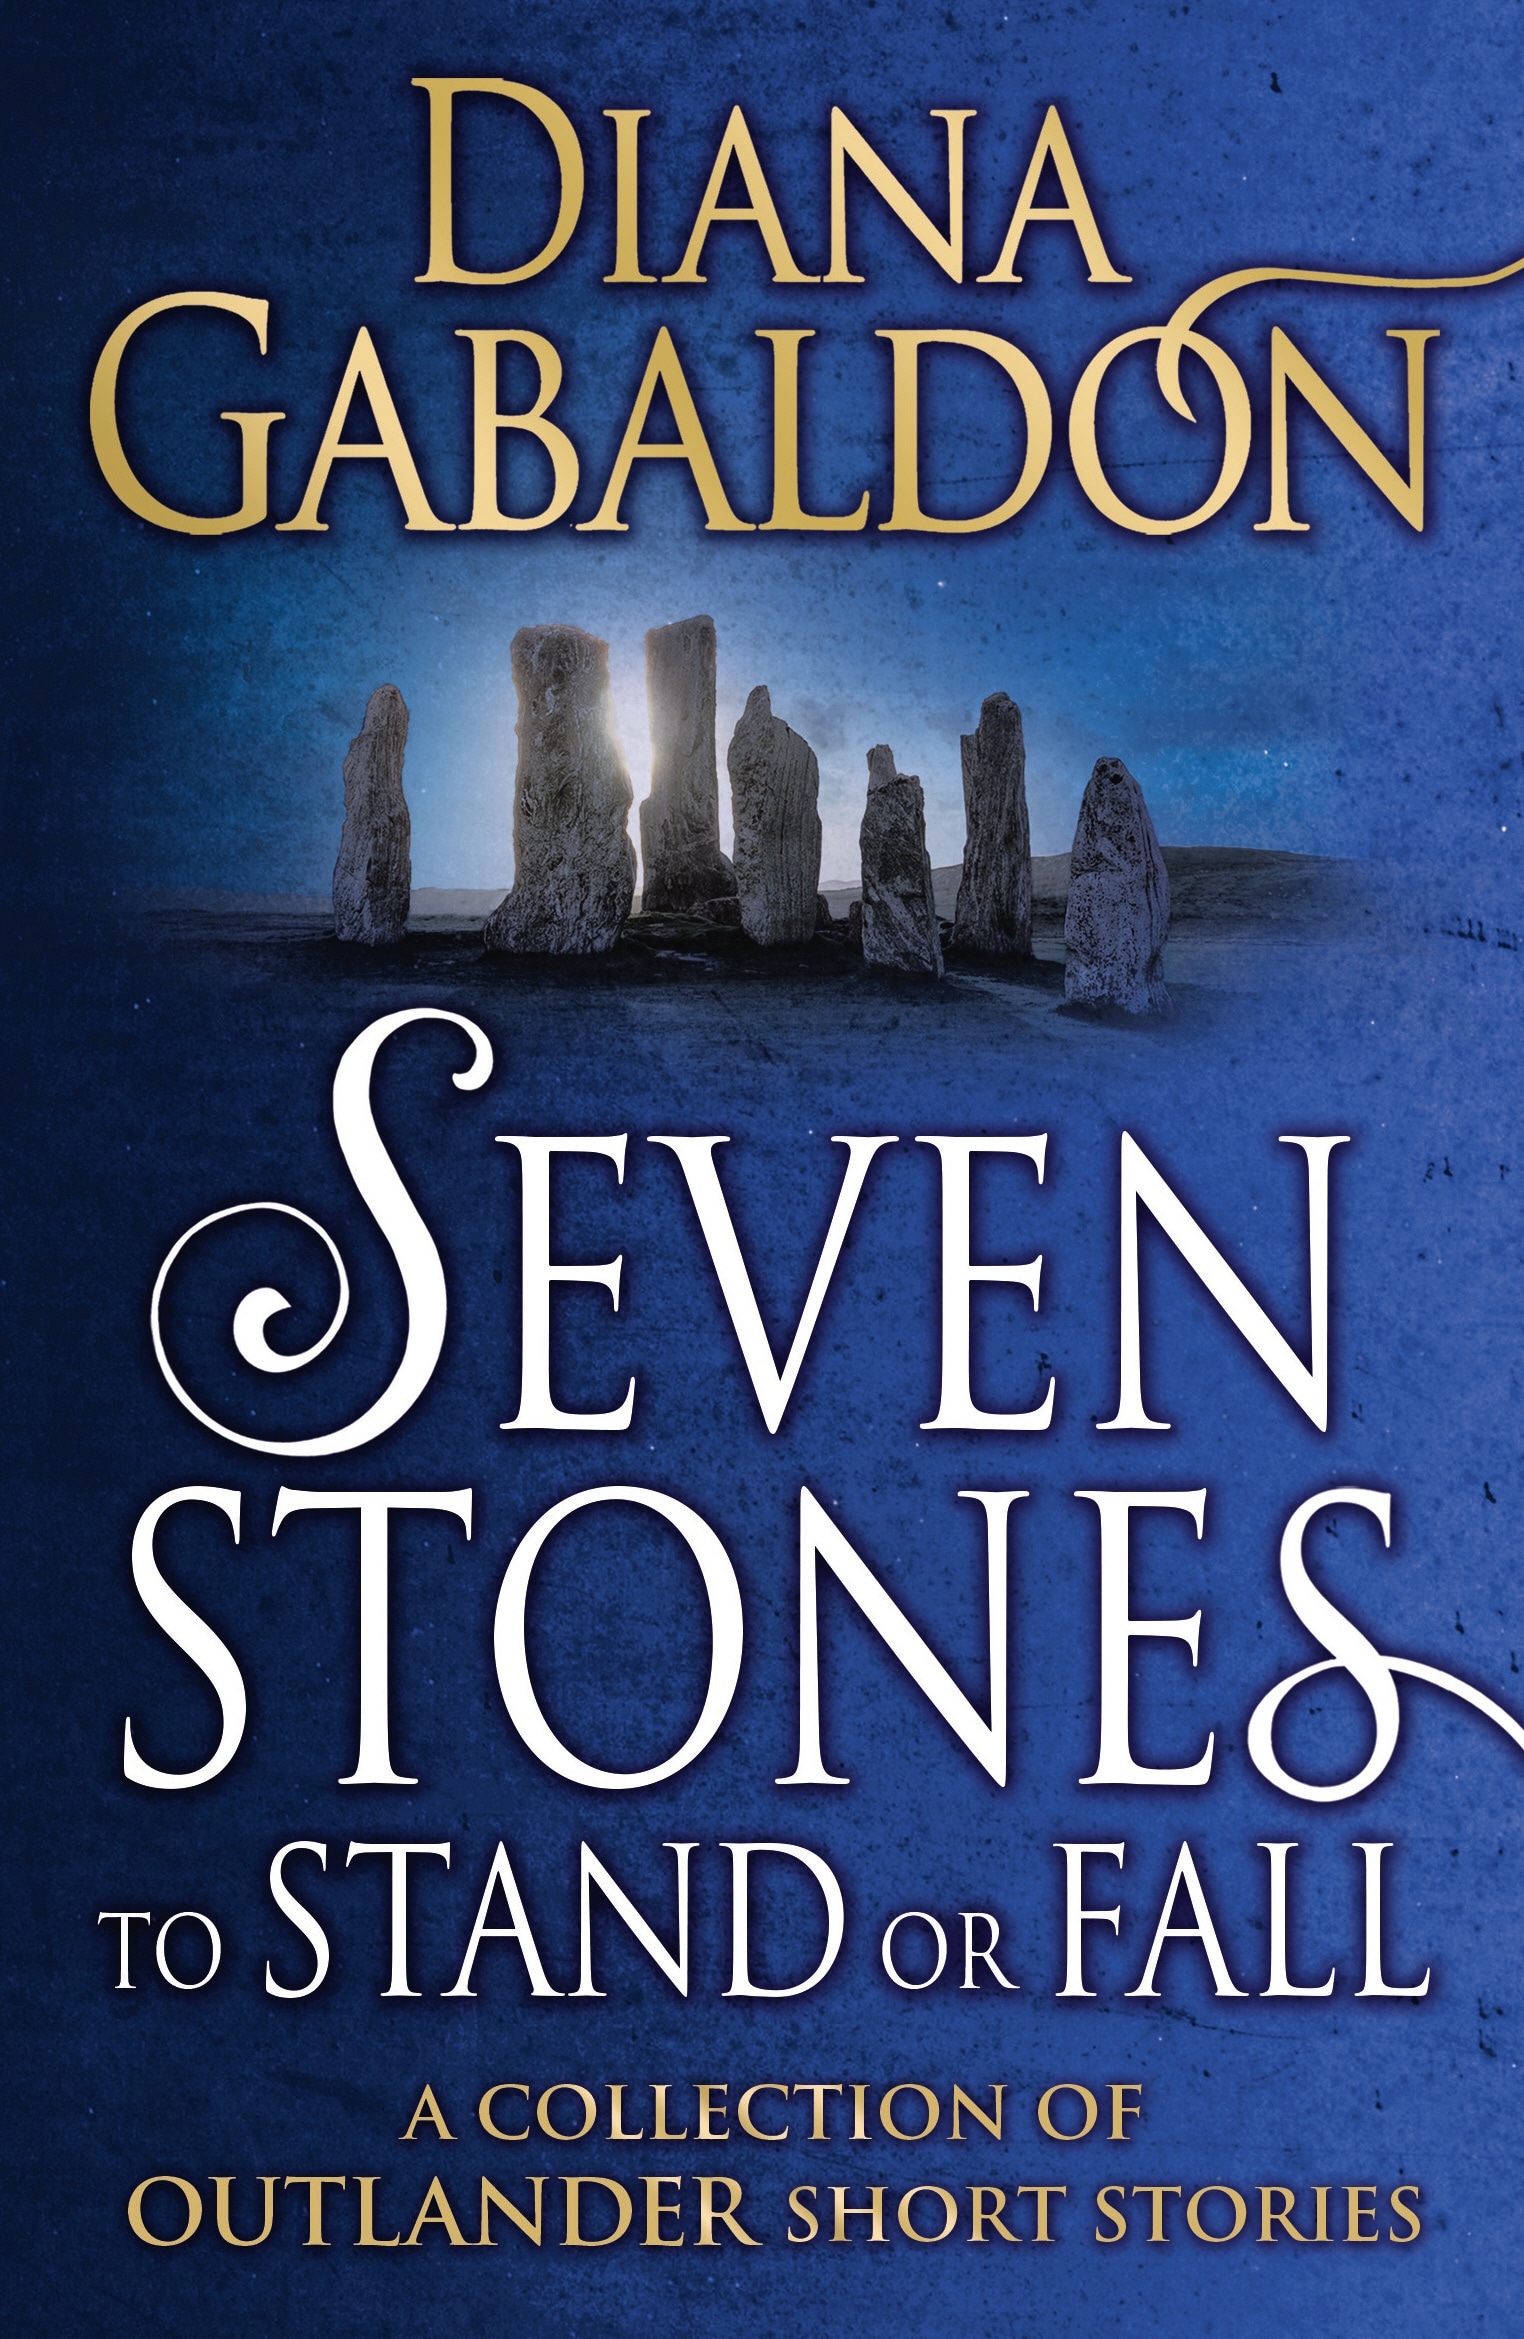 Book “Seven Stones to Stand or Fall” by Diana Gabaldon — June 14, 2018